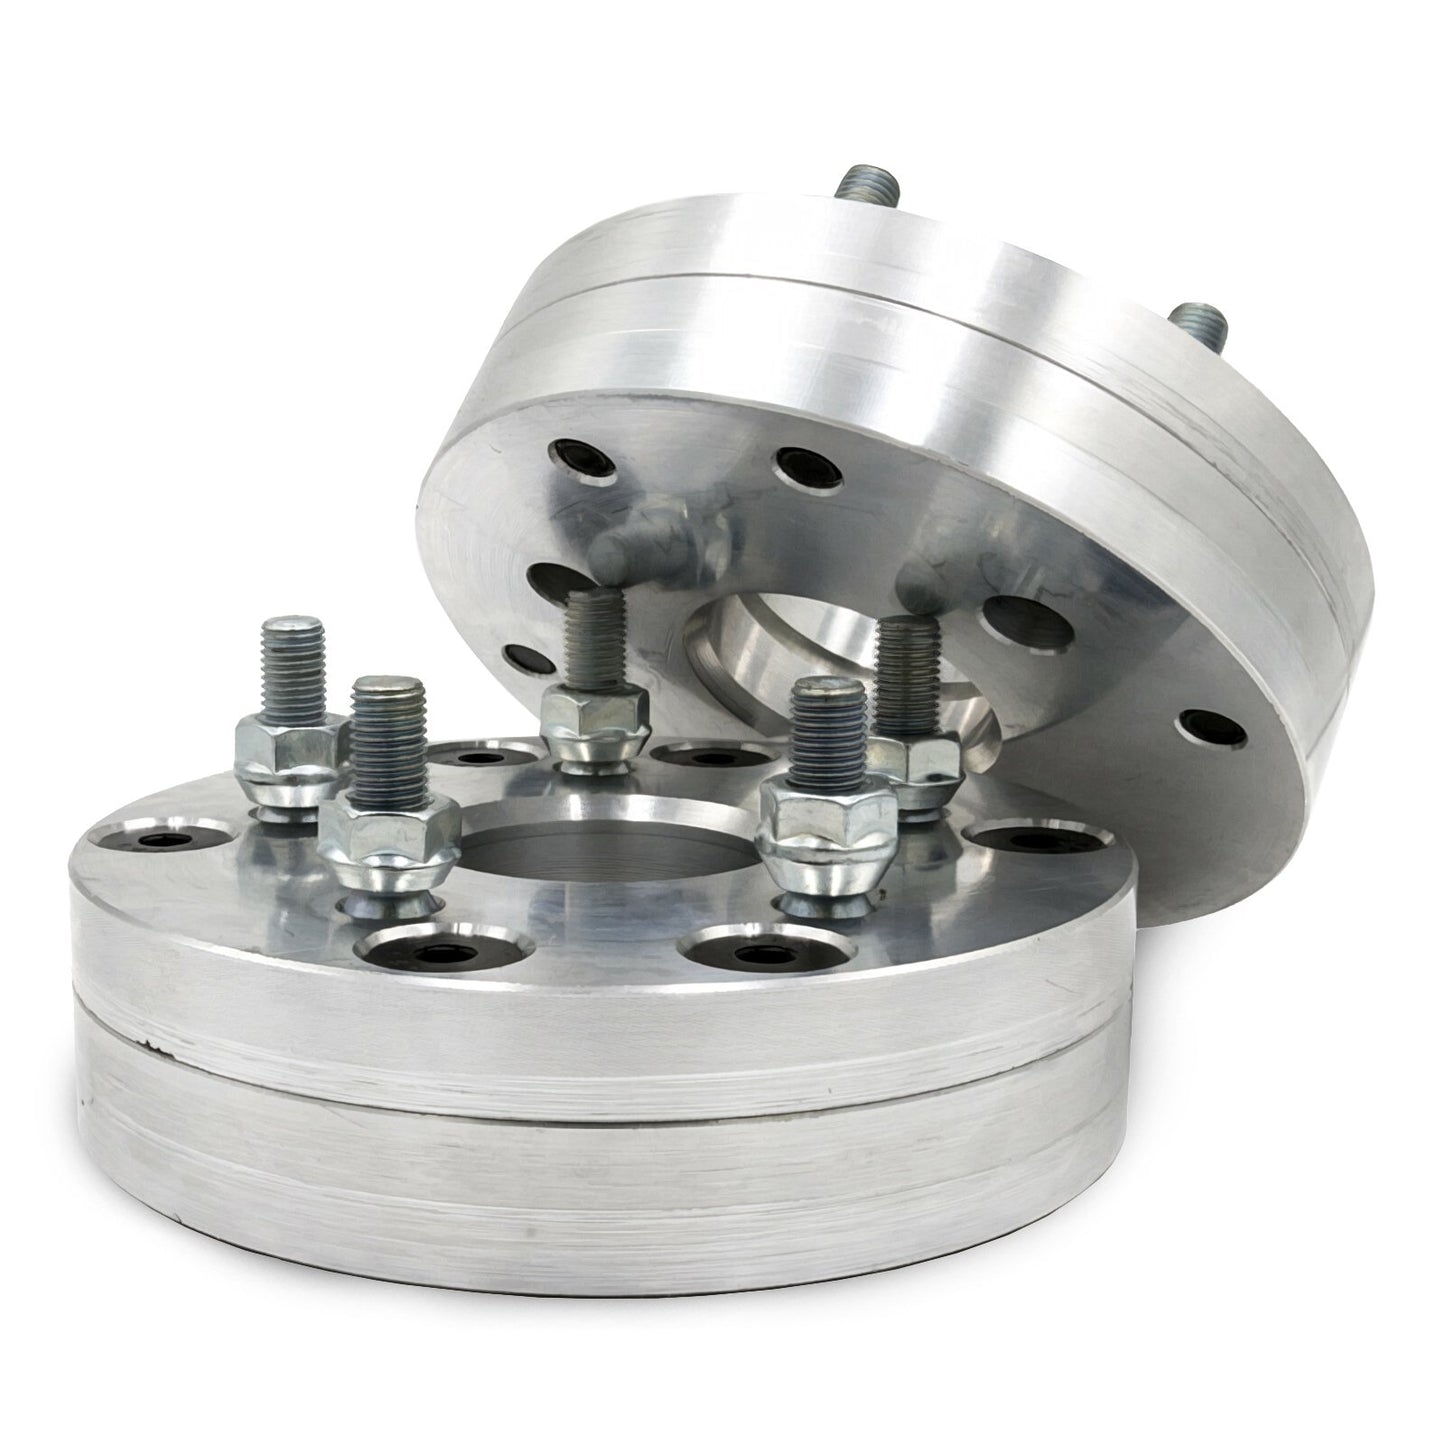 4x115 to 5x120 2 piece Wheel Adapter - Thickness: 1.5" - 3"